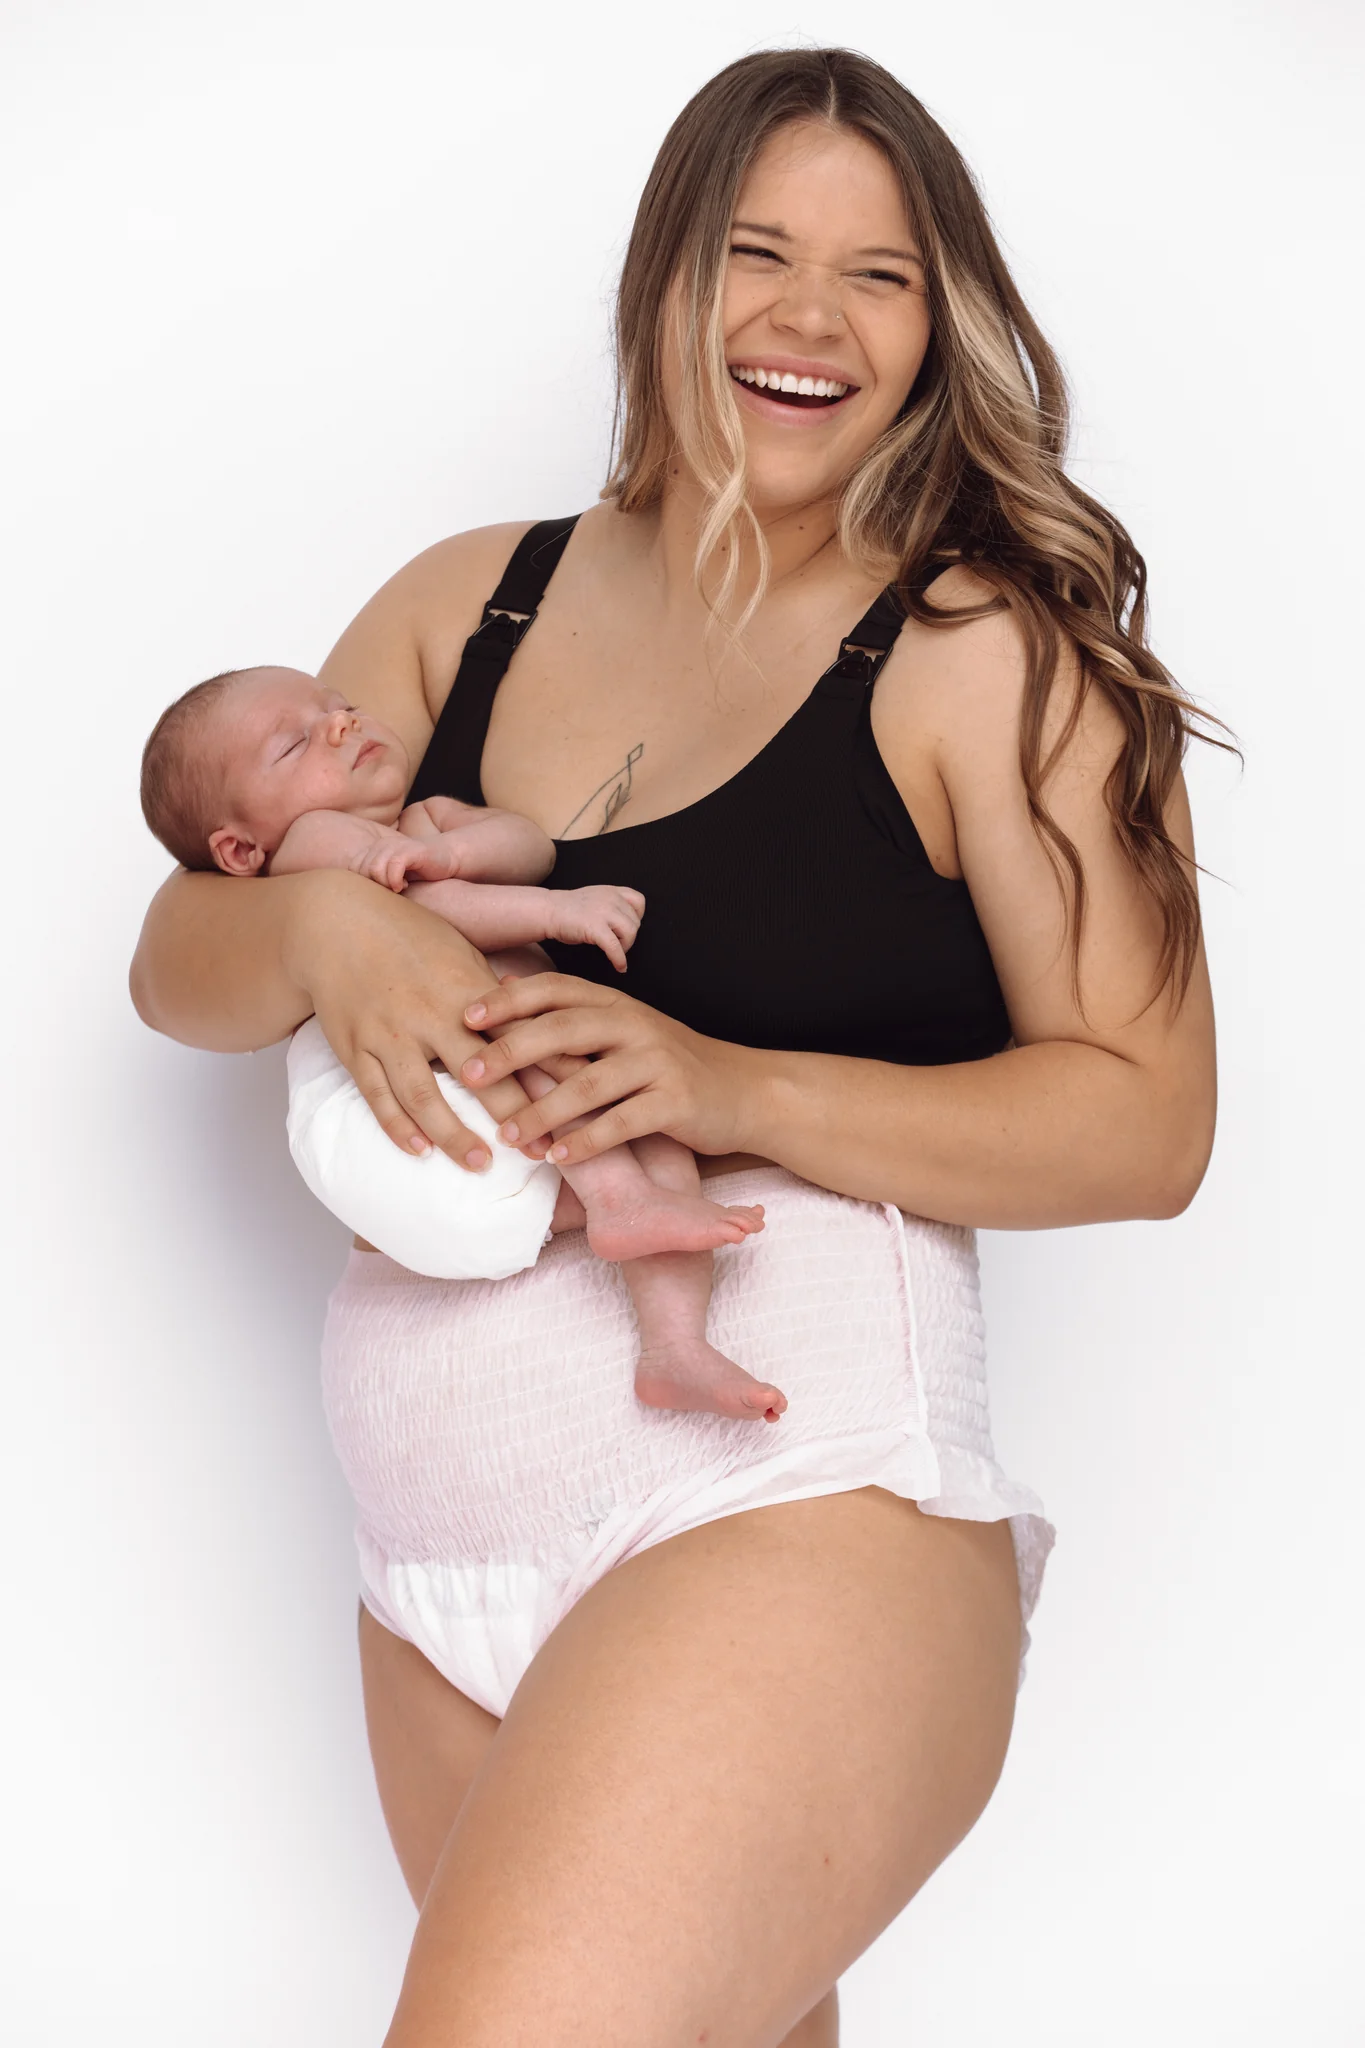 Partum Panties - Disposable postpartum underwear: high waisted, soft &  absorbent — Be Empowered - Birth and Parenting Classes with Midwife Stacey